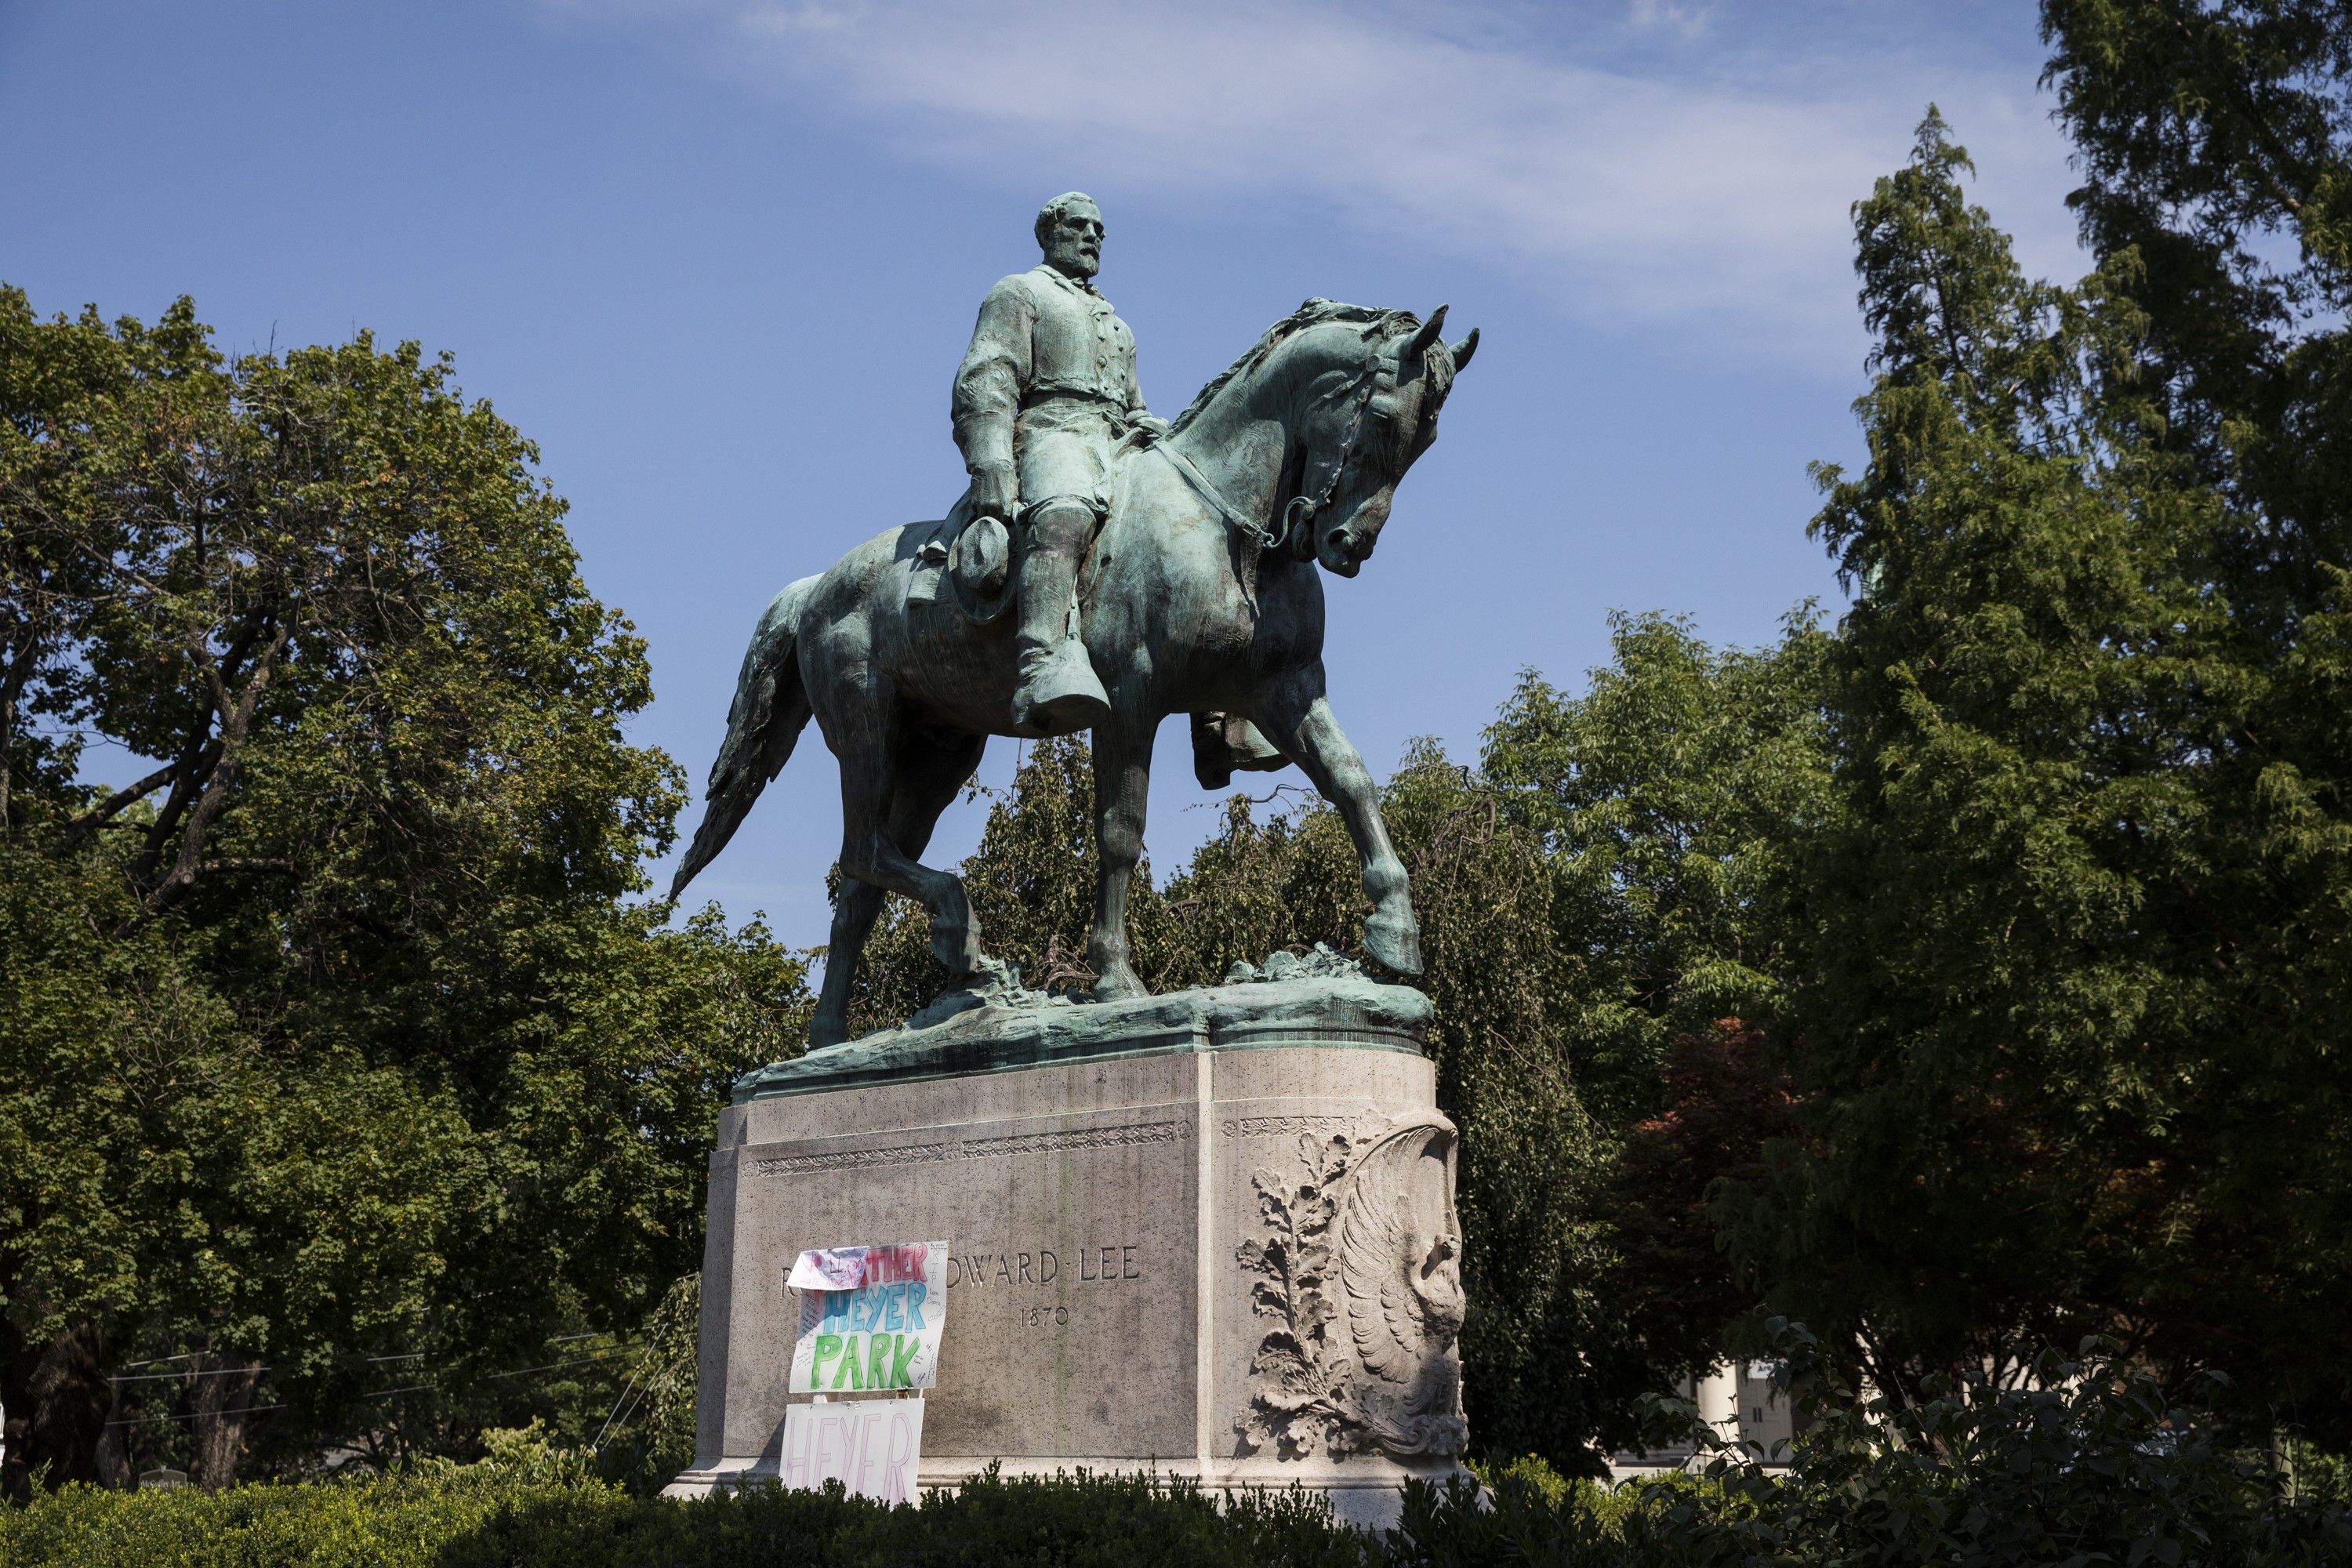 Signs calling for renaming Lee Park to Heyer Park, the site where white supremacists and Nazis gathered last Saturday, lay at the base of the Robert E. Lee statue after Heather Heyer was murdered, in Charlottesville, Virginia, on Aug. 16, 2017. (Samuel Corum—Anadolu Agency/Getty Images)